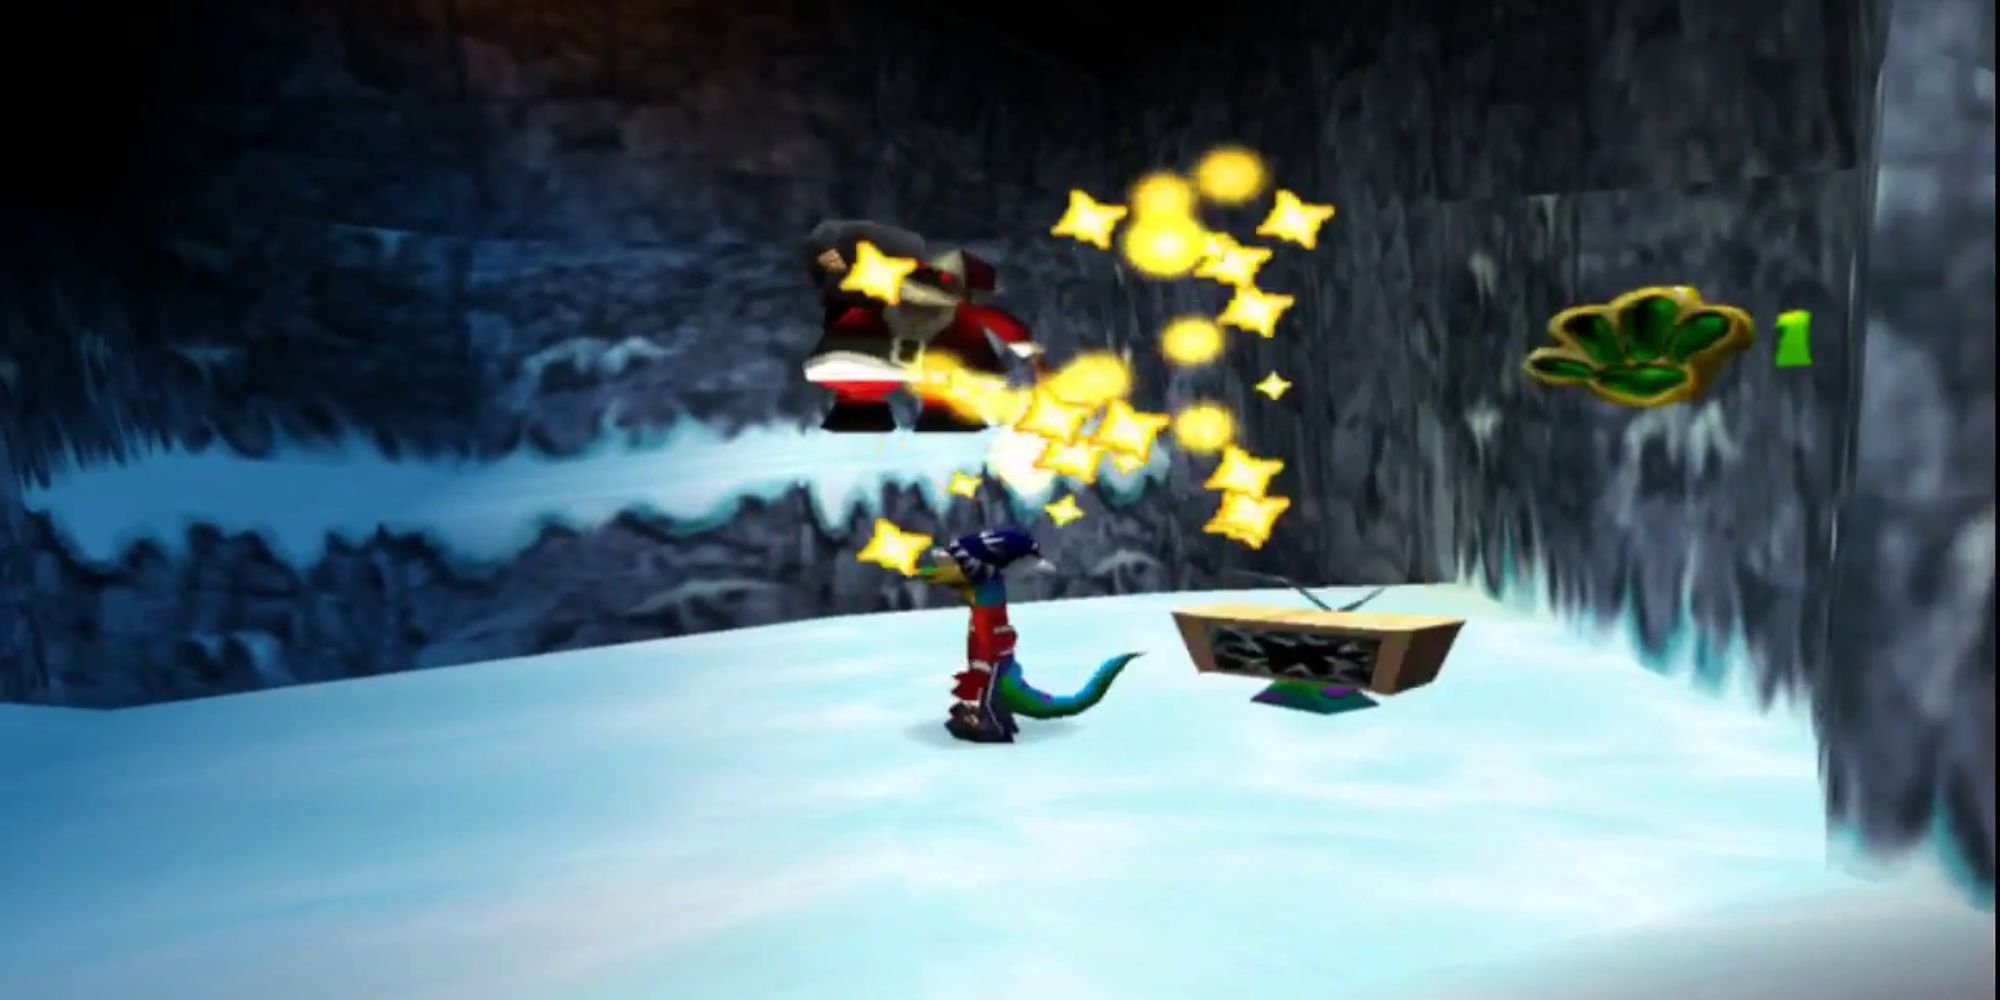 Gex fights and Evil Santa in a snowy cave